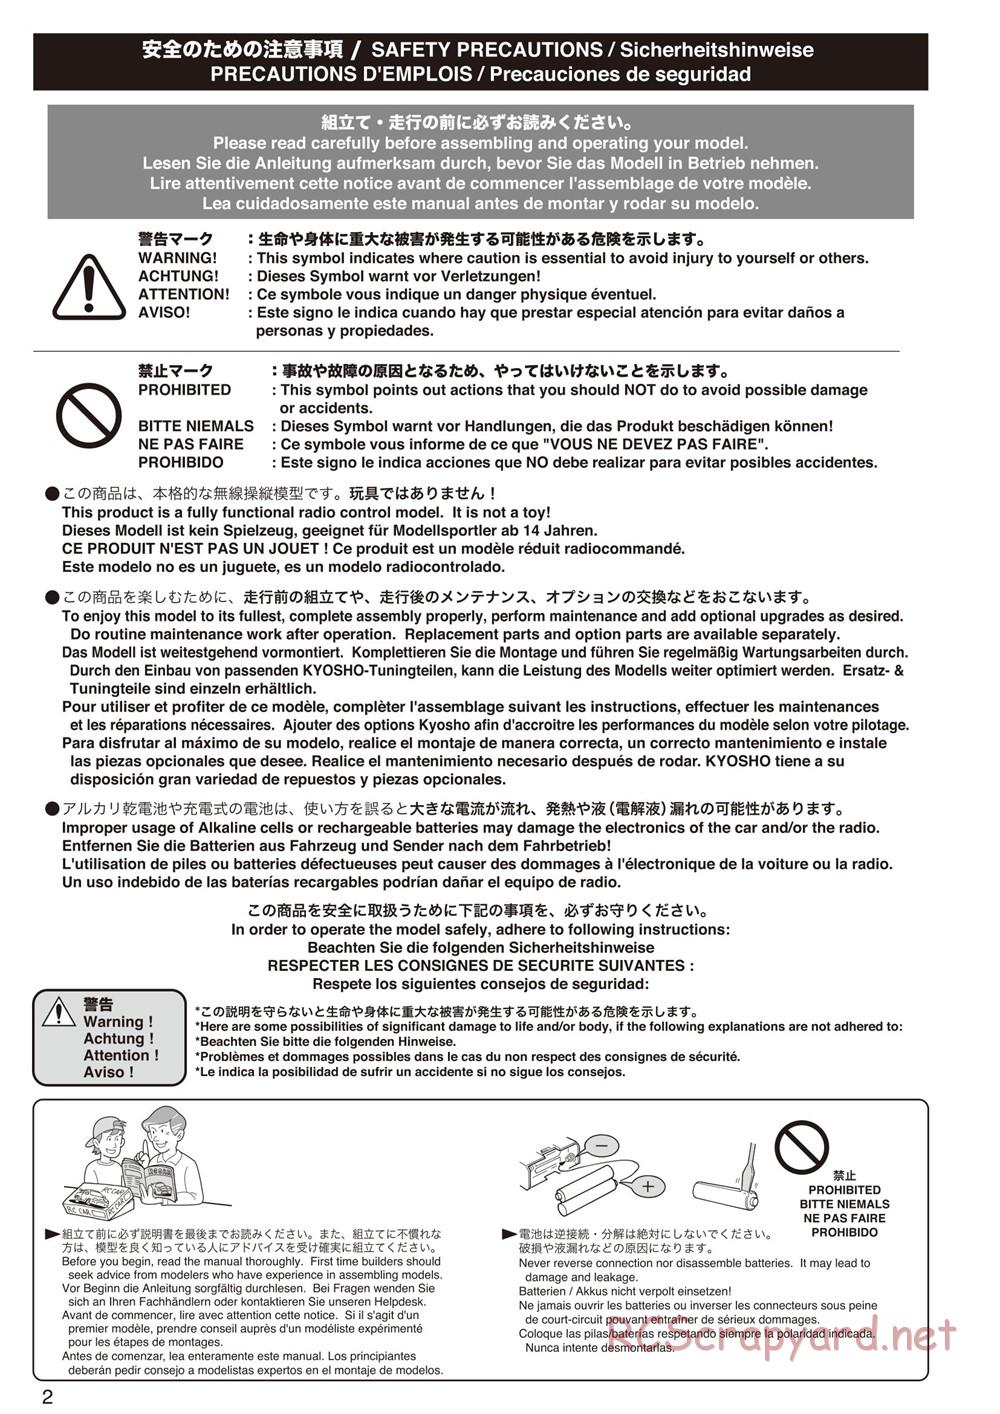 Kyosho - FO-XX VE - Manual - Page 2